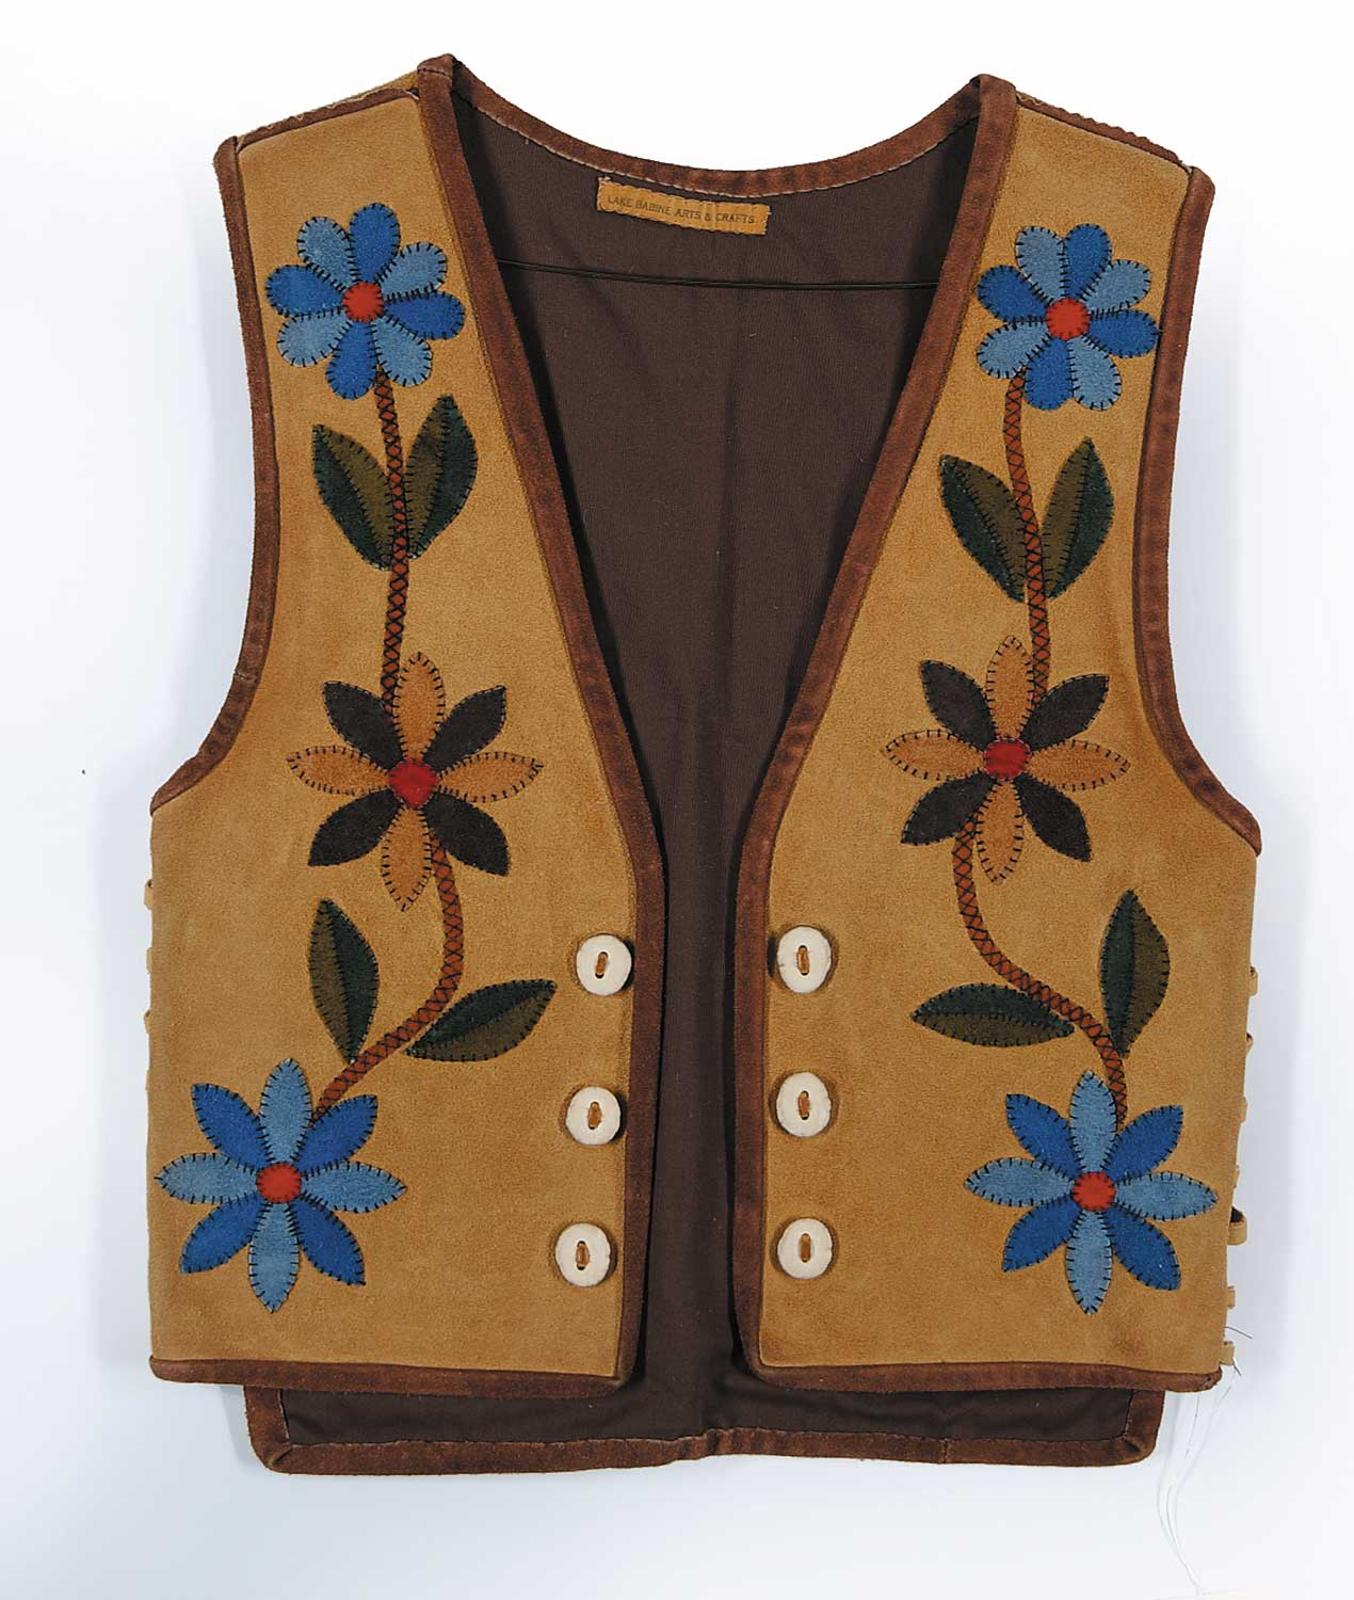 Robert Charles Aller (1922-2008) - Untitled - Moose Hide Vest with Leather Applique and Antler Buttons